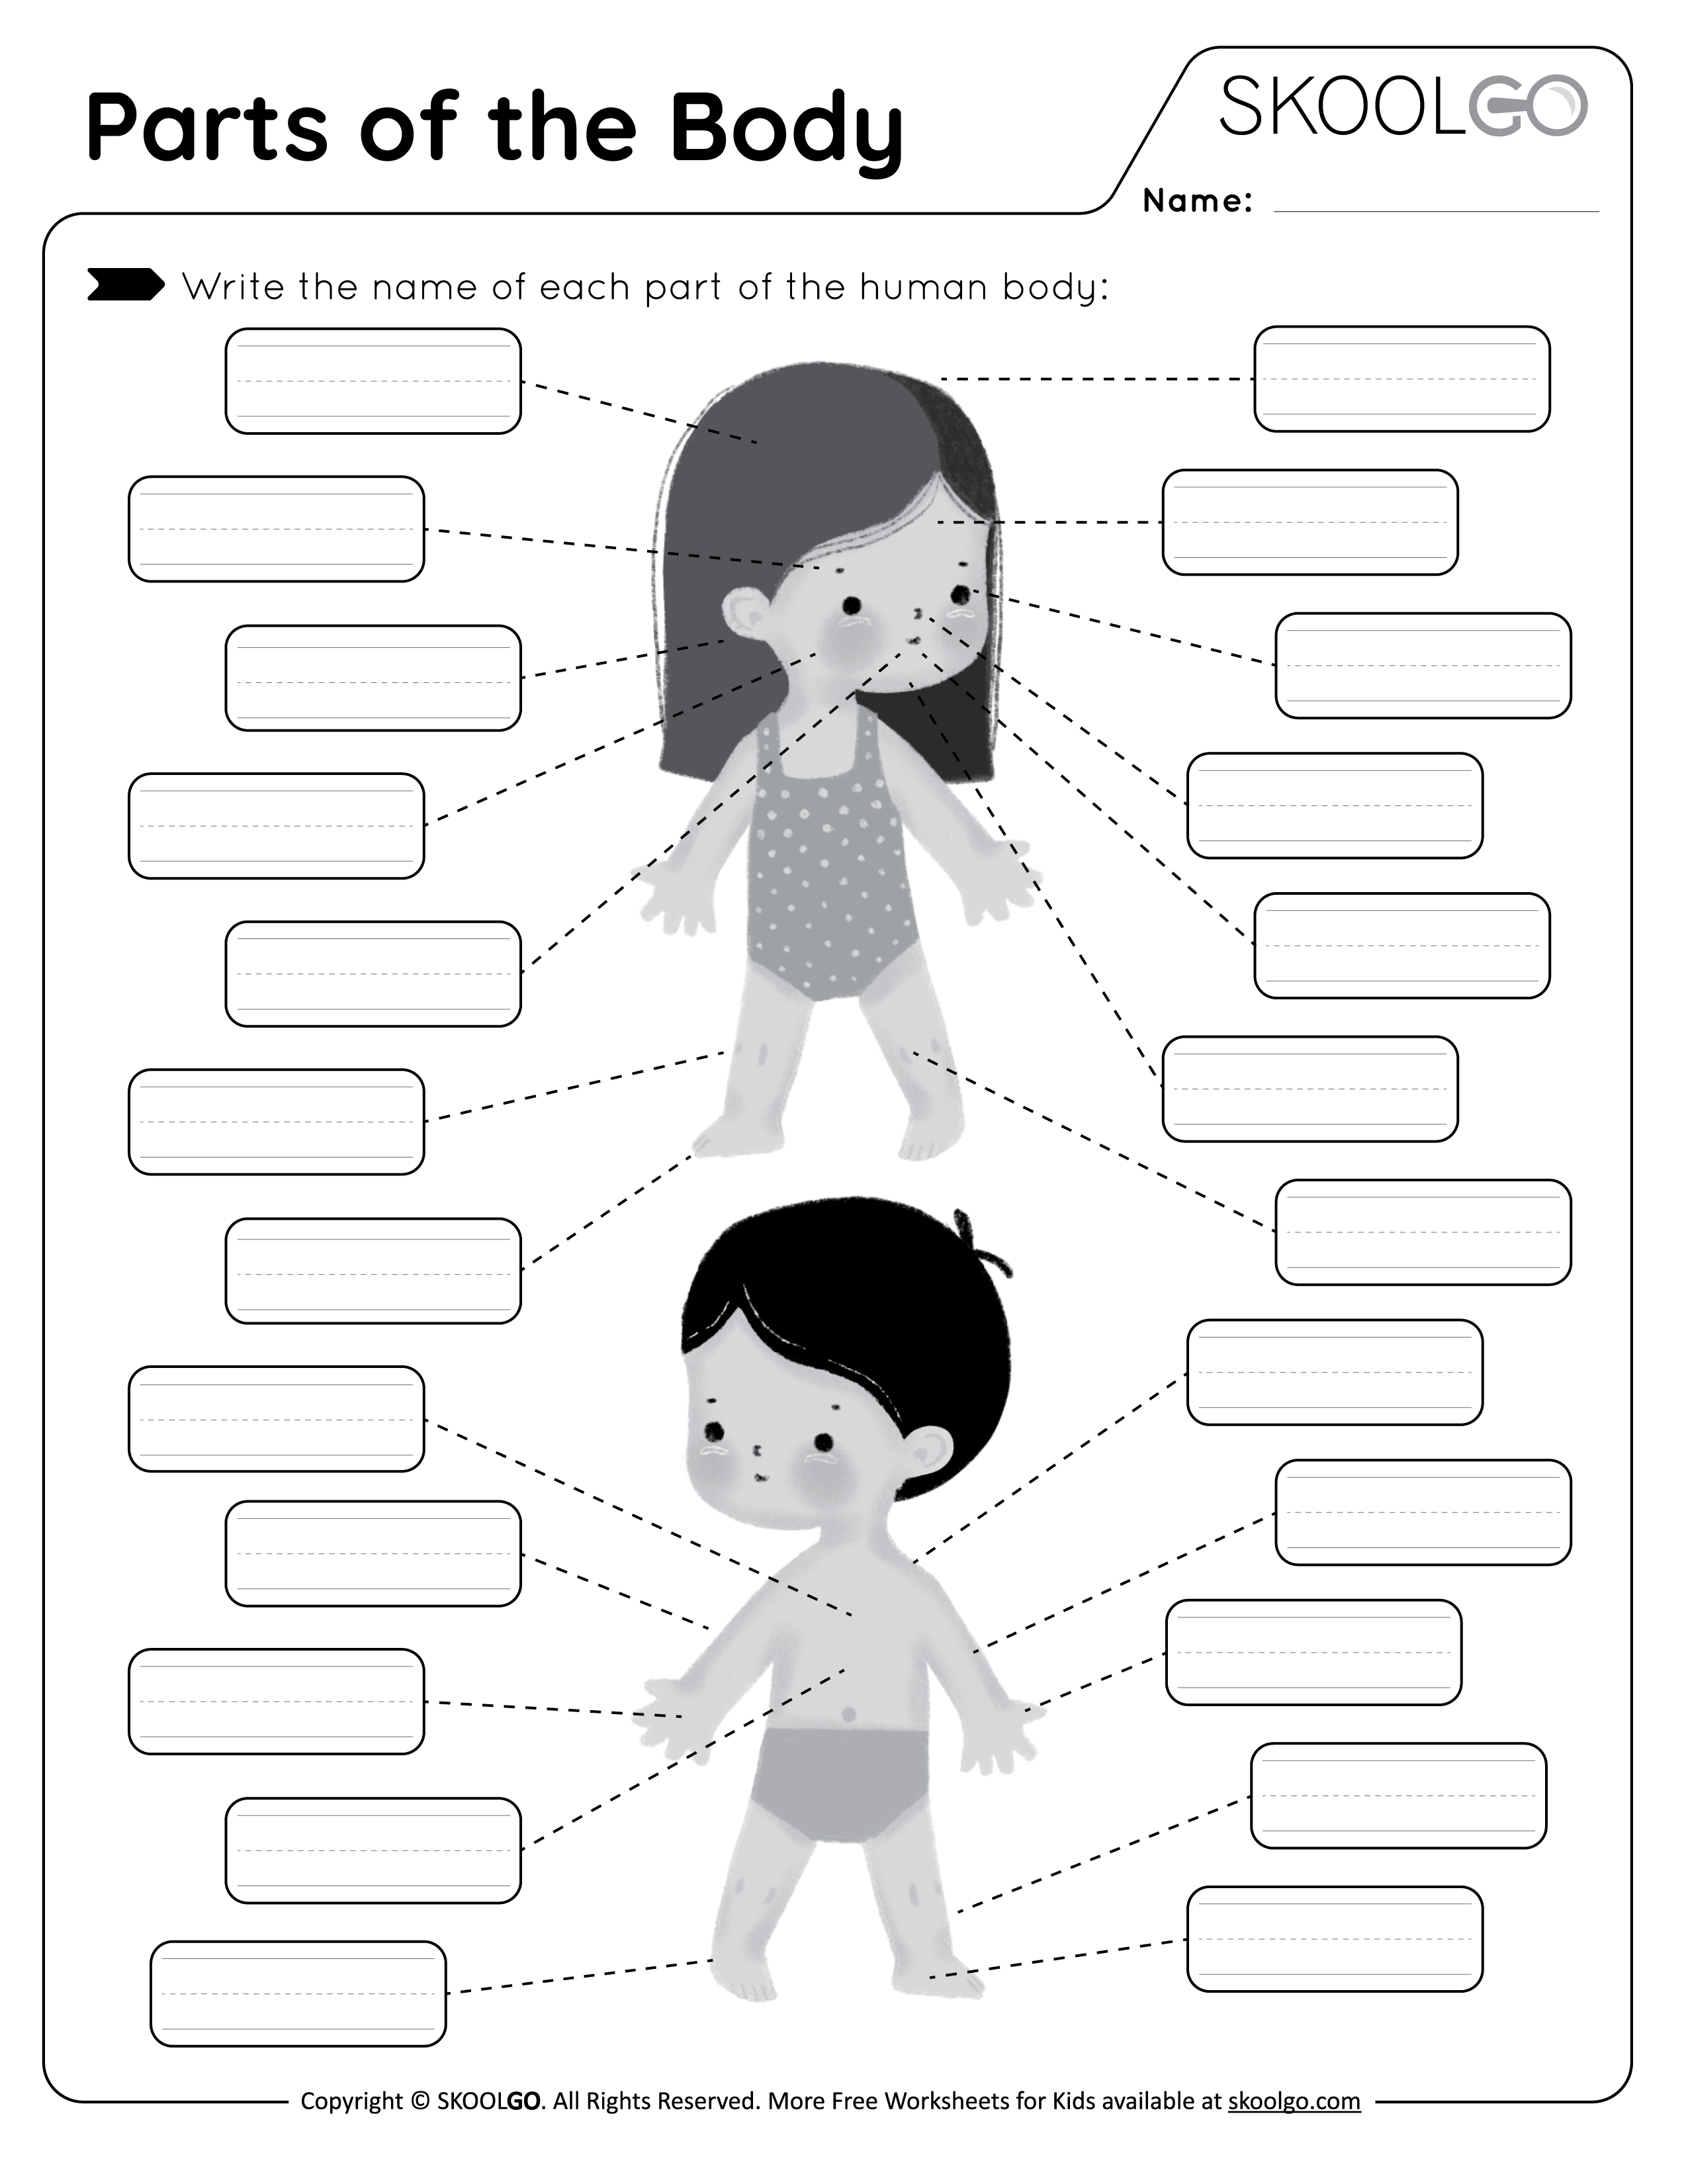 Parts of the Body - Free Black and White Worksheet Activity for Kids